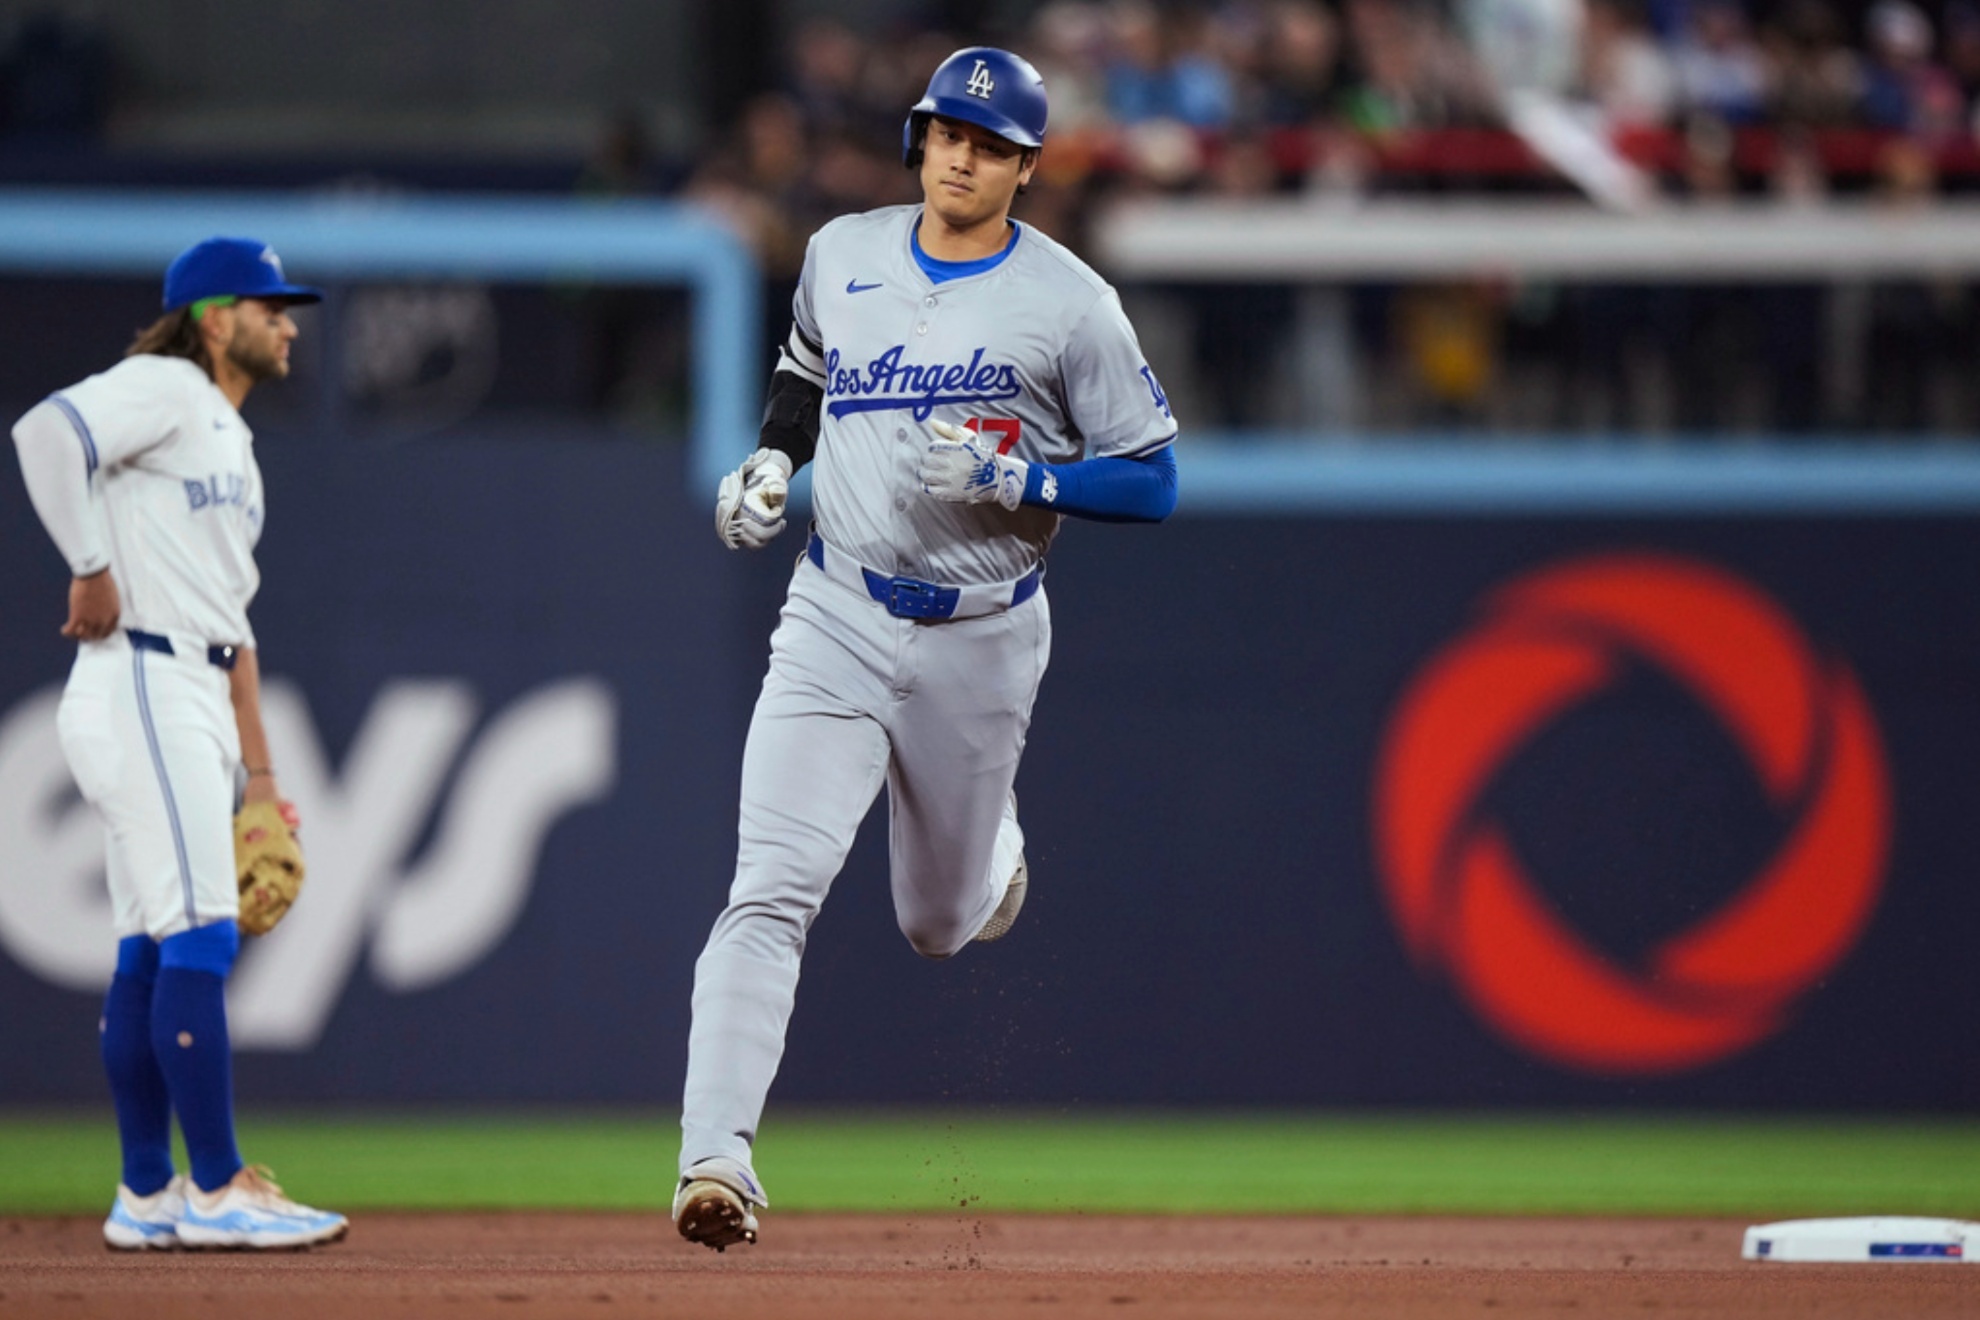 Los Angeles Dodgers star, Shohei Ohtani, was booed by Blue Jays fans in Toronto